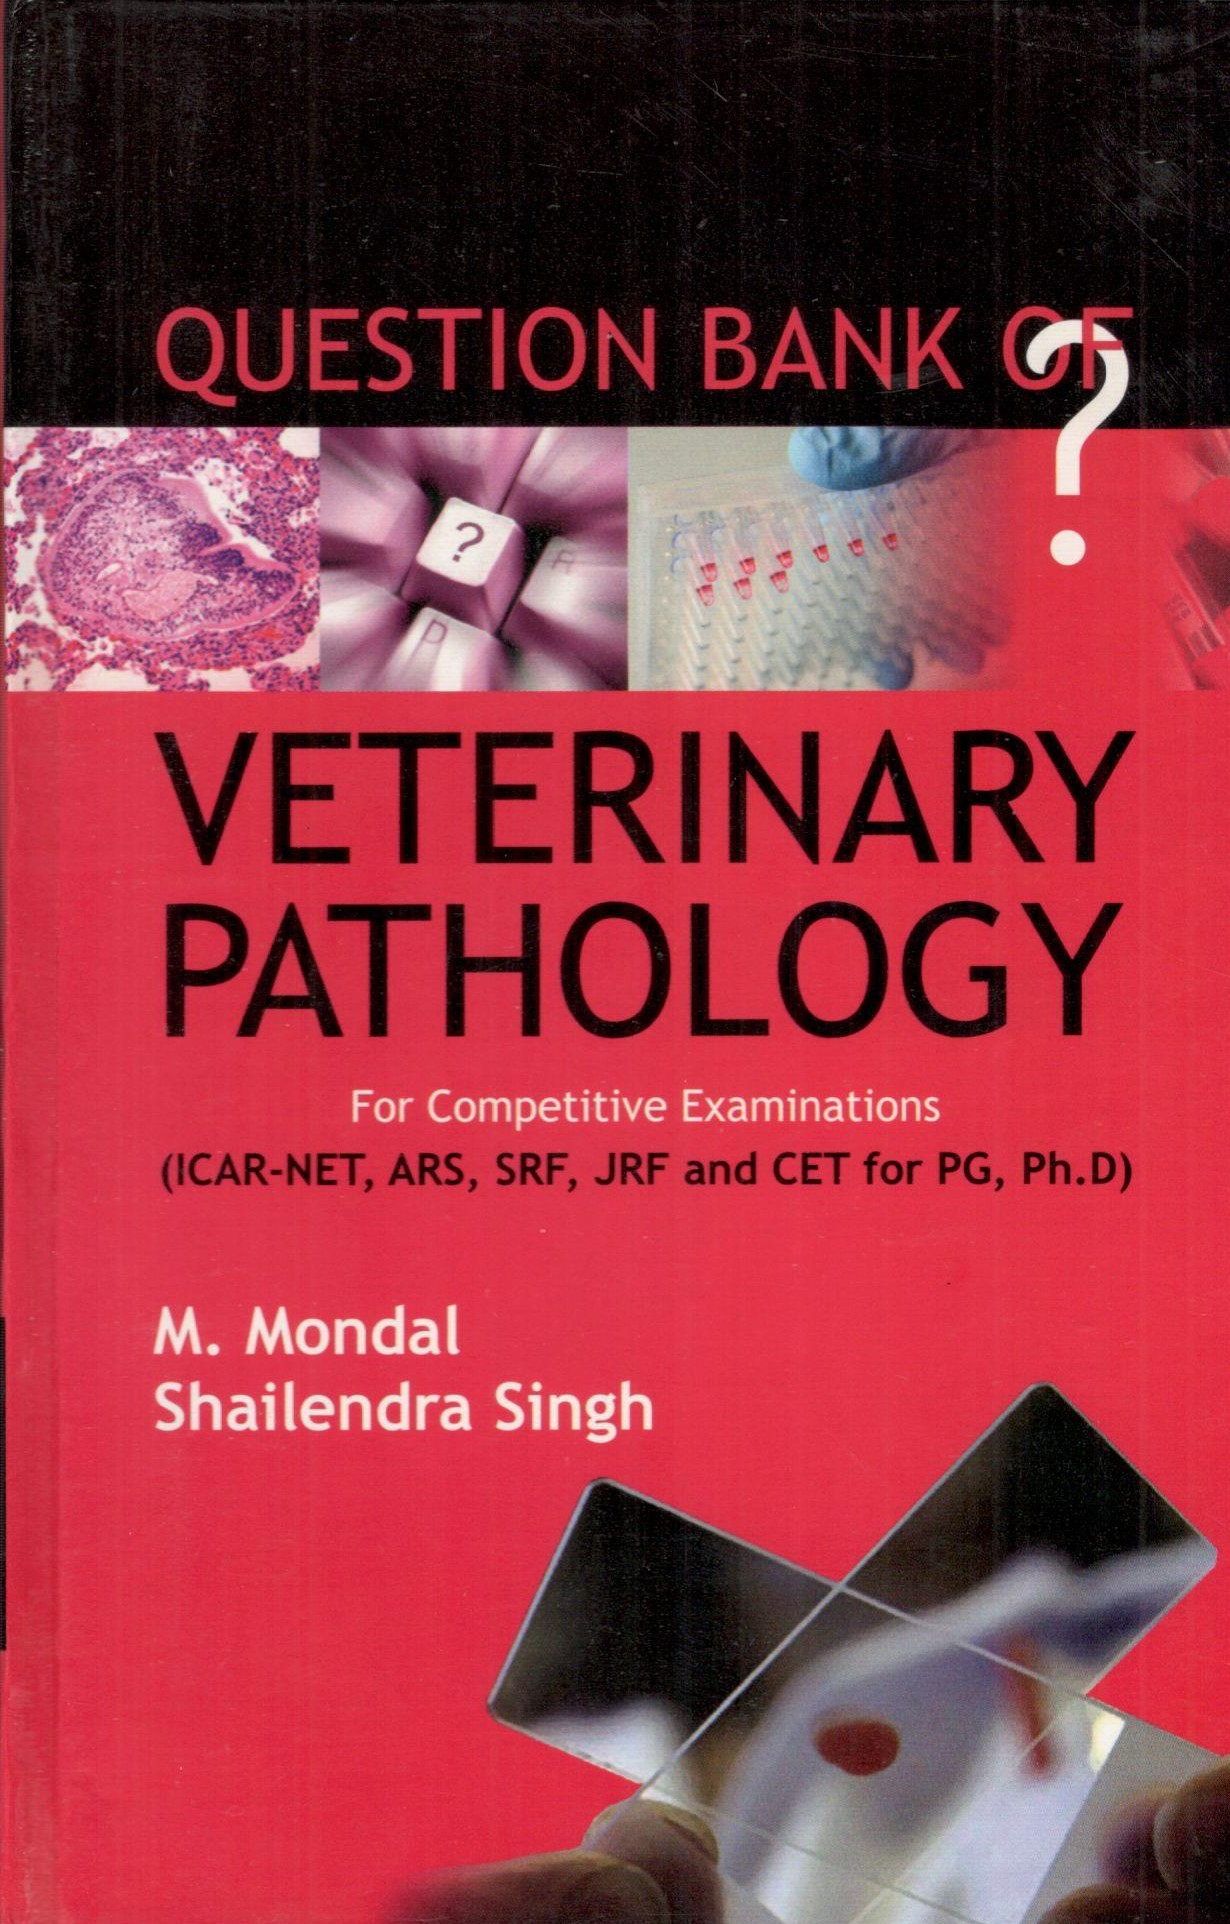 Question Bank Of Veterinary Pathology For Competitive Examinations (ICAR-NET,ARS,SRF,JRF and CET For PG, Ph.D)